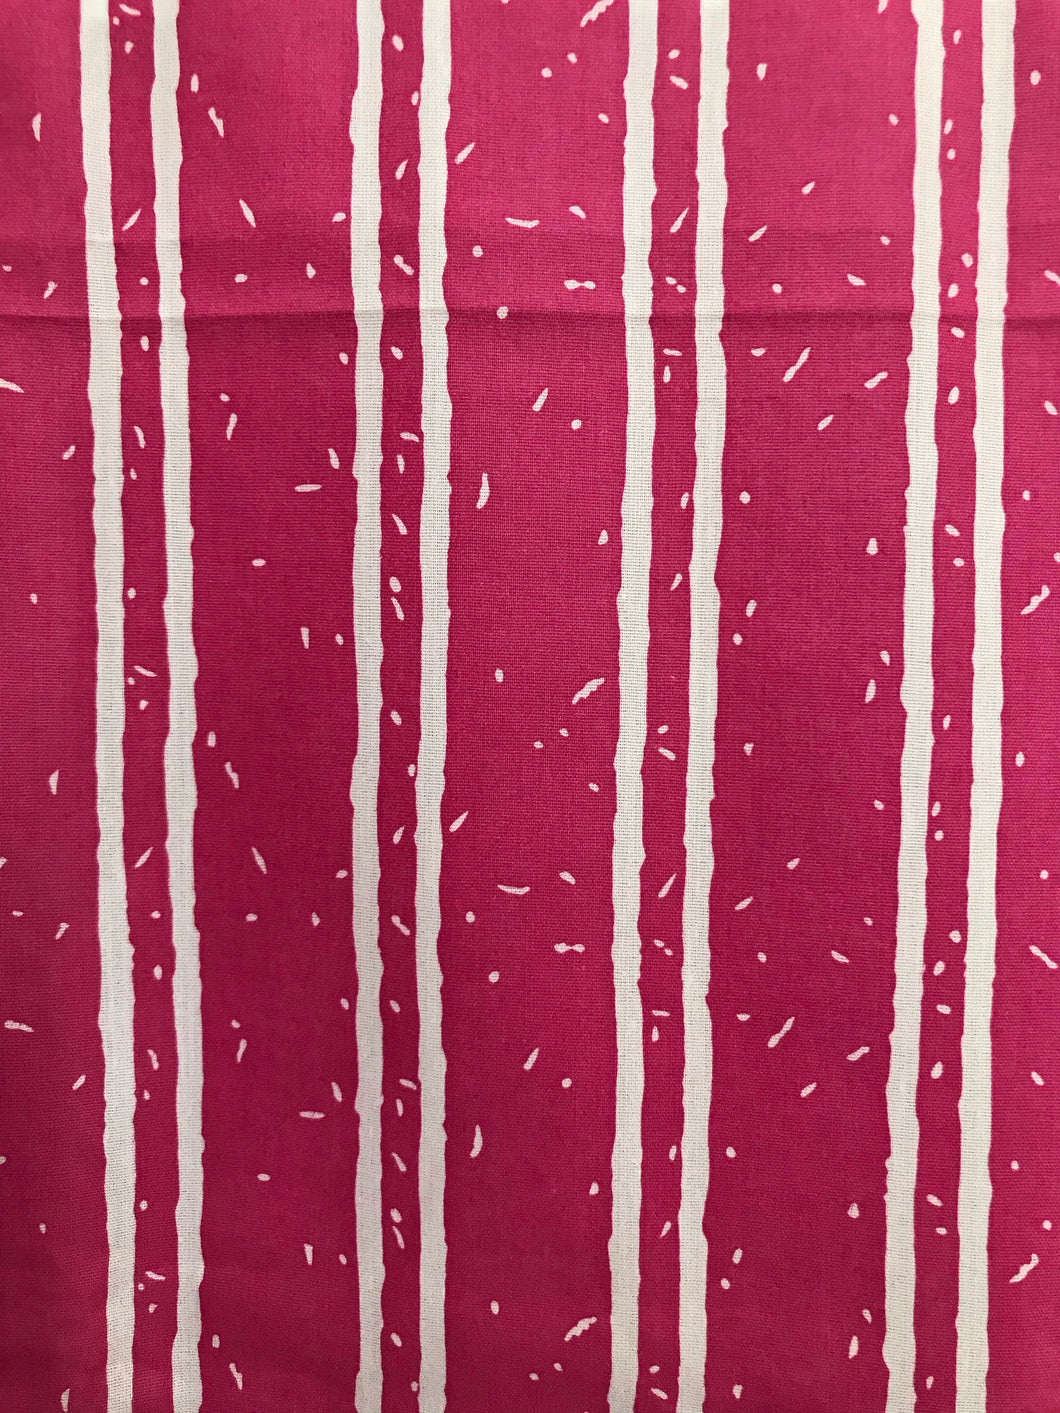 1980’s Pink Striped with white fabric - Cotton blend